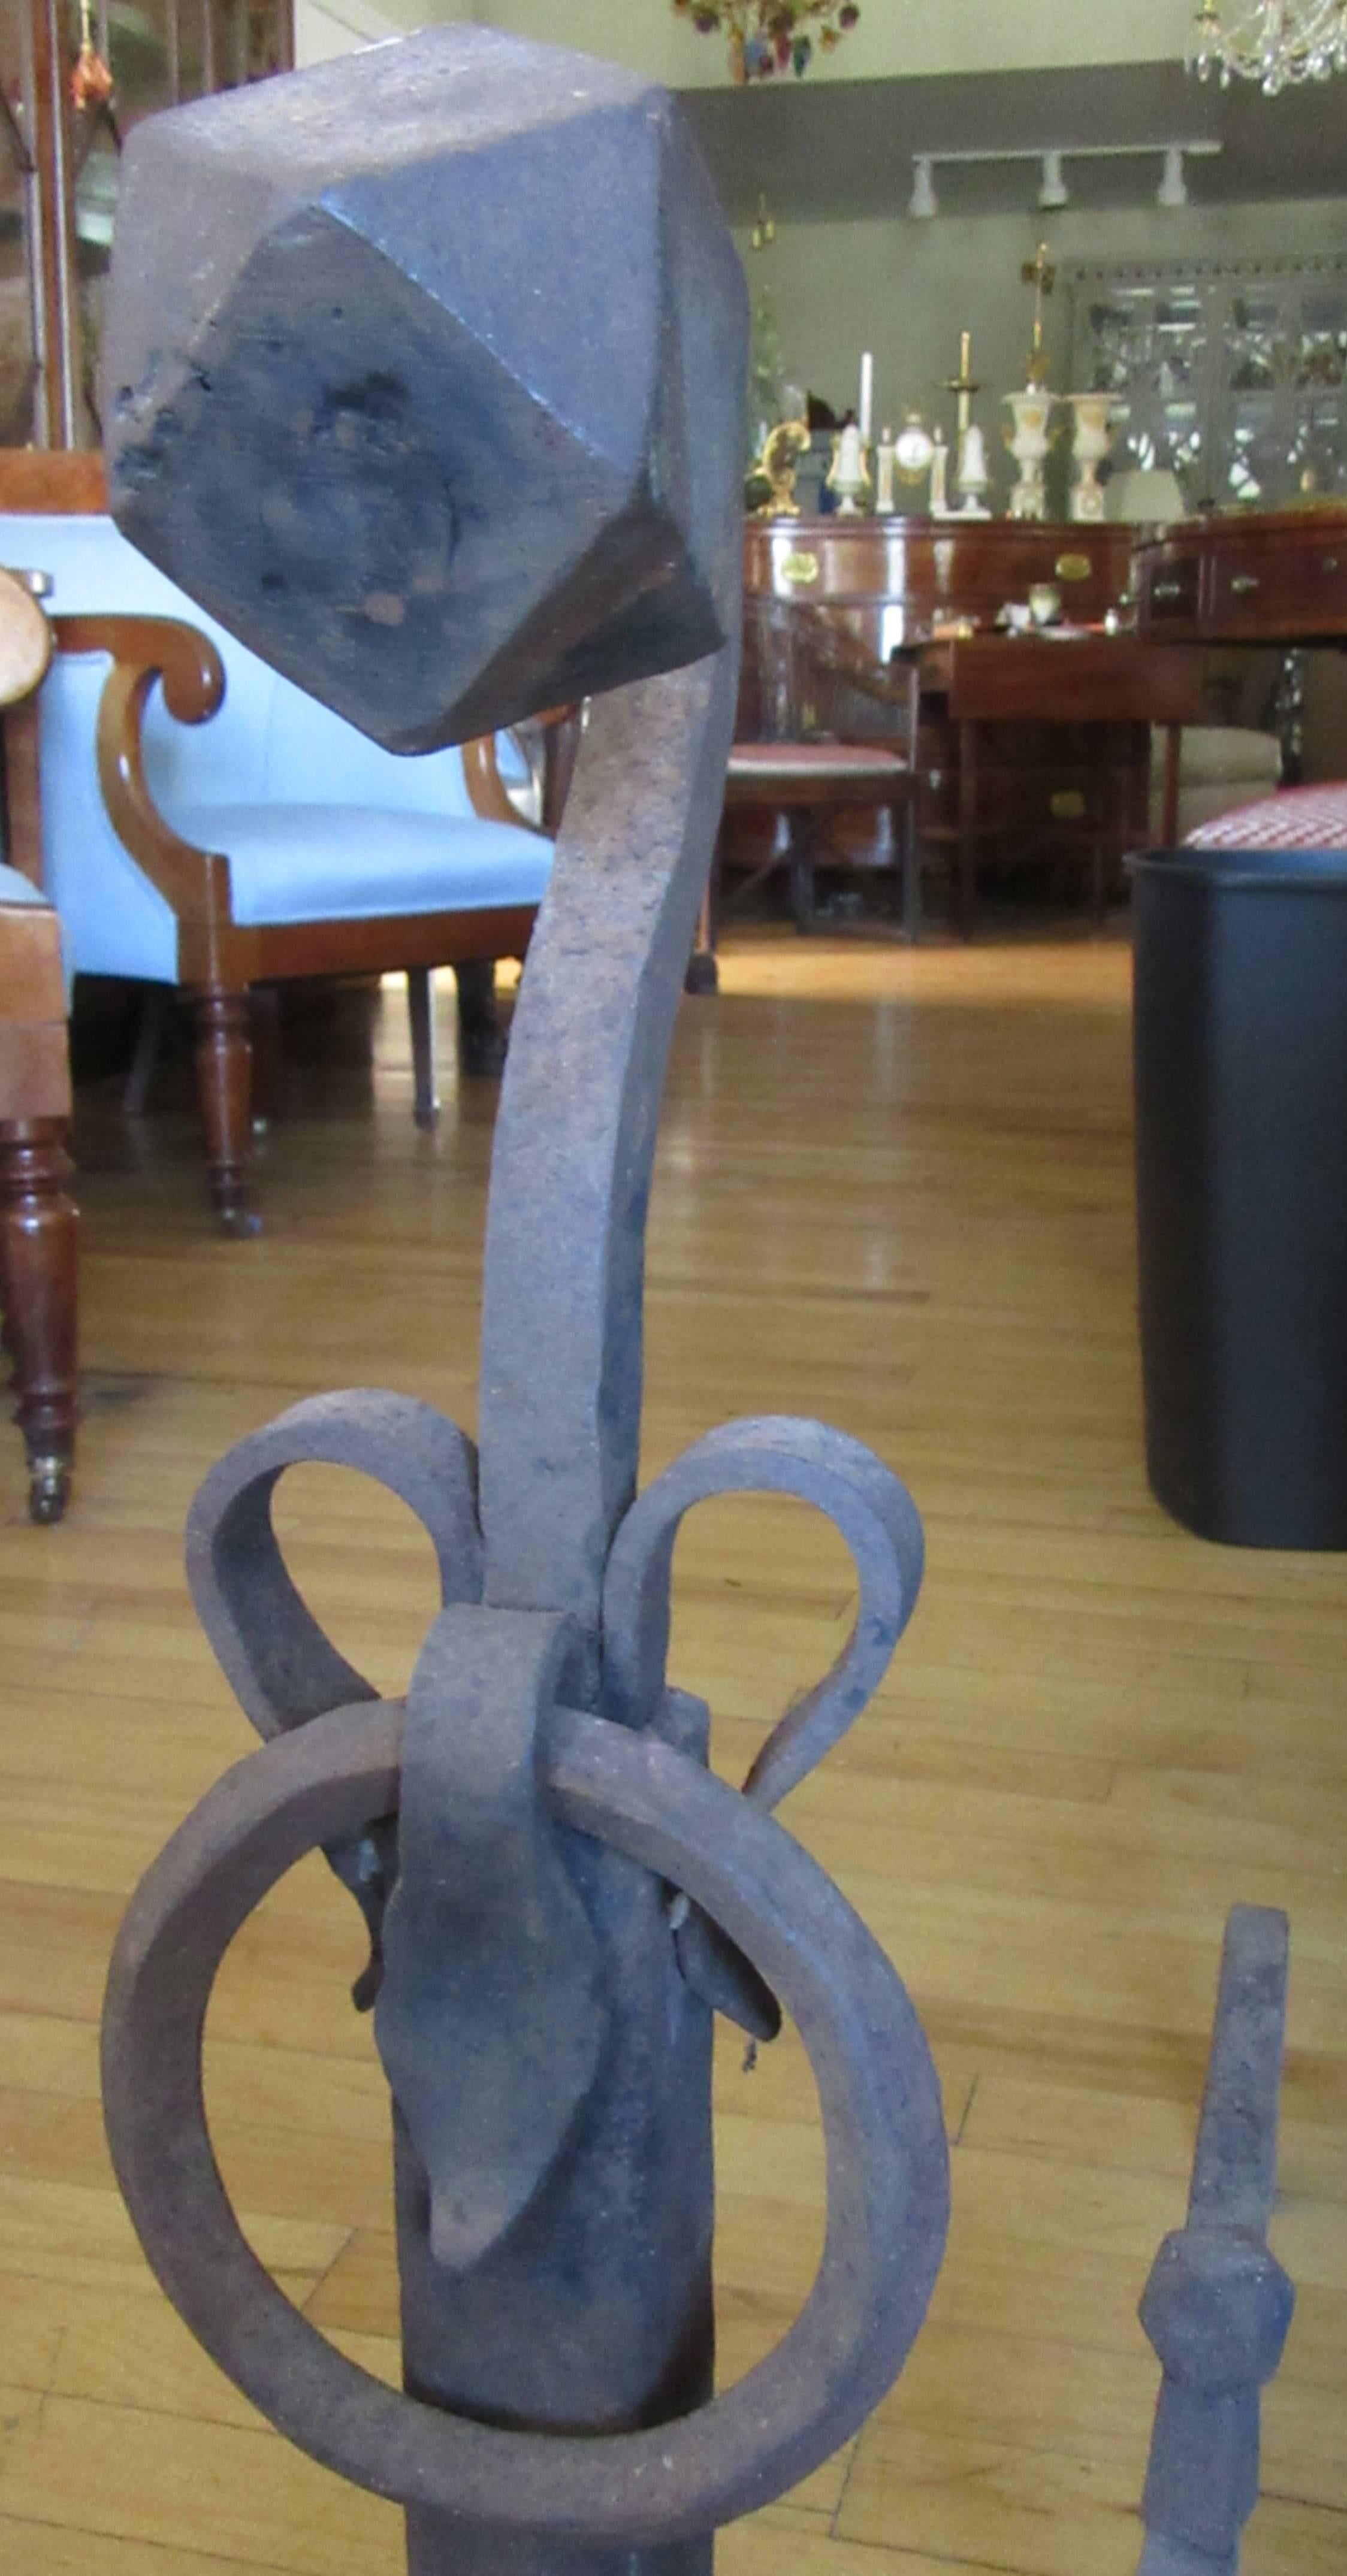 Large hand-forged iron fir place andirons with ball finials and decorative rings.